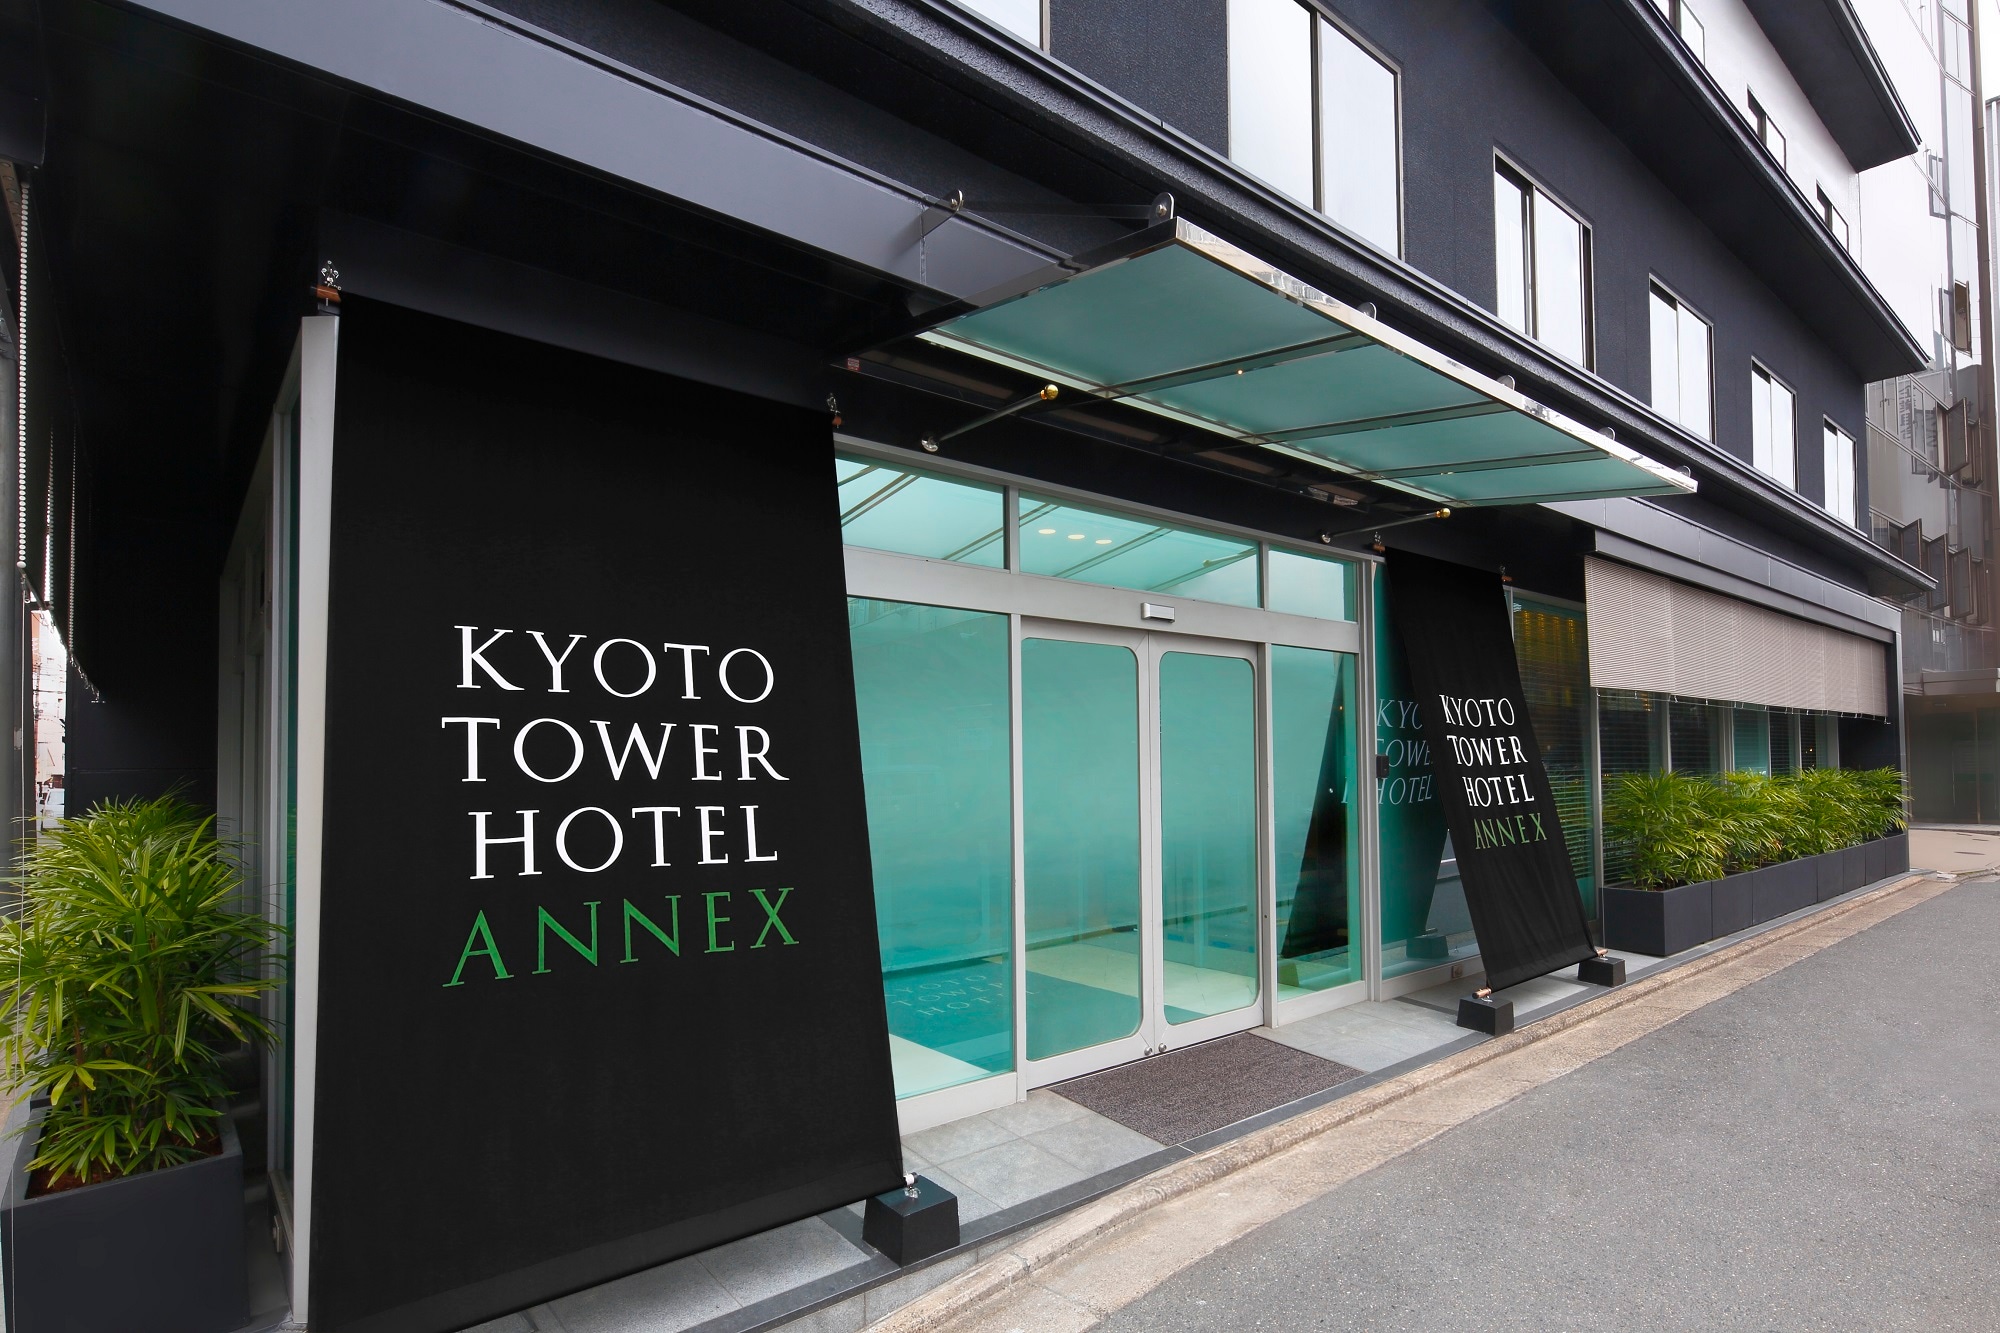 3 minutes walk from Kyoto station! Kyoto Tower Hotel Annex